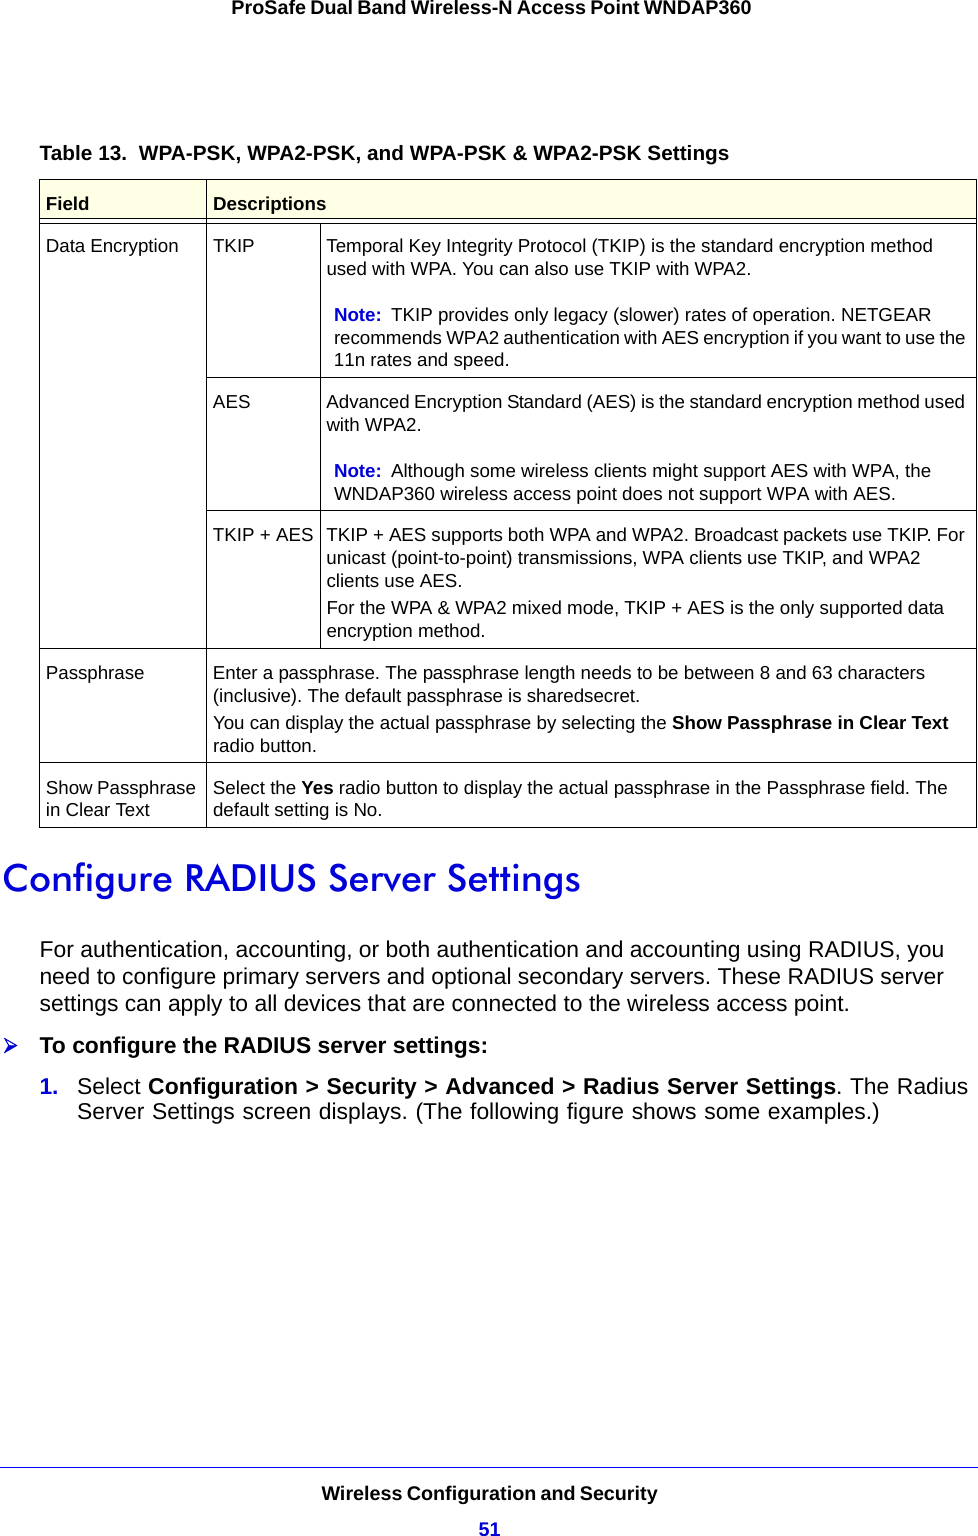 Wireless Configuration and Security51 ProSafe Dual Band Wireless-N Access Point WNDAP360Configure RADIUS Server SettingsFor authentication, accounting, or both authentication and accounting using RADIUS, you need to configure primary servers and optional secondary servers. These RADIUS server settings can apply to all devices that are connected to the wireless access point.To configure the RADIUS server settings:1.  Select Configuration &gt; Security &gt; Advanced &gt; Radius Server Settings. The Radius Server Settings screen displays. (The following figure shows some examples.)Table 13.  WPA-PSK, WPA2-PSK, and WPA-PSK &amp; WPA2-PSK Settings Field DescriptionsData Encryption TKIP Temporal Key Integrity Protocol (TKIP) is the standard encryption method used with WPA. You can also use TKIP with WPA2.Note: TKIP provides only legacy (slower) rates of operation. NETGEAR recommends WPA2 authentication with AES encryption if you want to use the 11n rates and speed. AES Advanced Encryption Standard (AES) is the standard encryption method used with WPA2.Note: Although some wireless clients might support AES with WPA, the WNDAP360 wireless access point does not support WPA with AES.TKIP + AES TKIP + AES supports both WPA and WPA2. Broadcast packets use TKIP. For unicast (point-to-point) transmissions, WPA clients use TKIP, and WPA2 clients use AES.For the WPA &amp; WPA2 mixed mode, TKIP + AES is the only supported data encryption method.Passphrase Enter a passphrase. The passphrase length needs to be between 8 and 63 characters (inclusive). The default passphrase is sharedsecret.You can display the actual passphrase by selecting the Show Passphrase in Clear Text radio button. Show Passphrase in Clear TextSelect the Yes radio button to display the actual passphrase in the Passphrase field. The default setting is No.